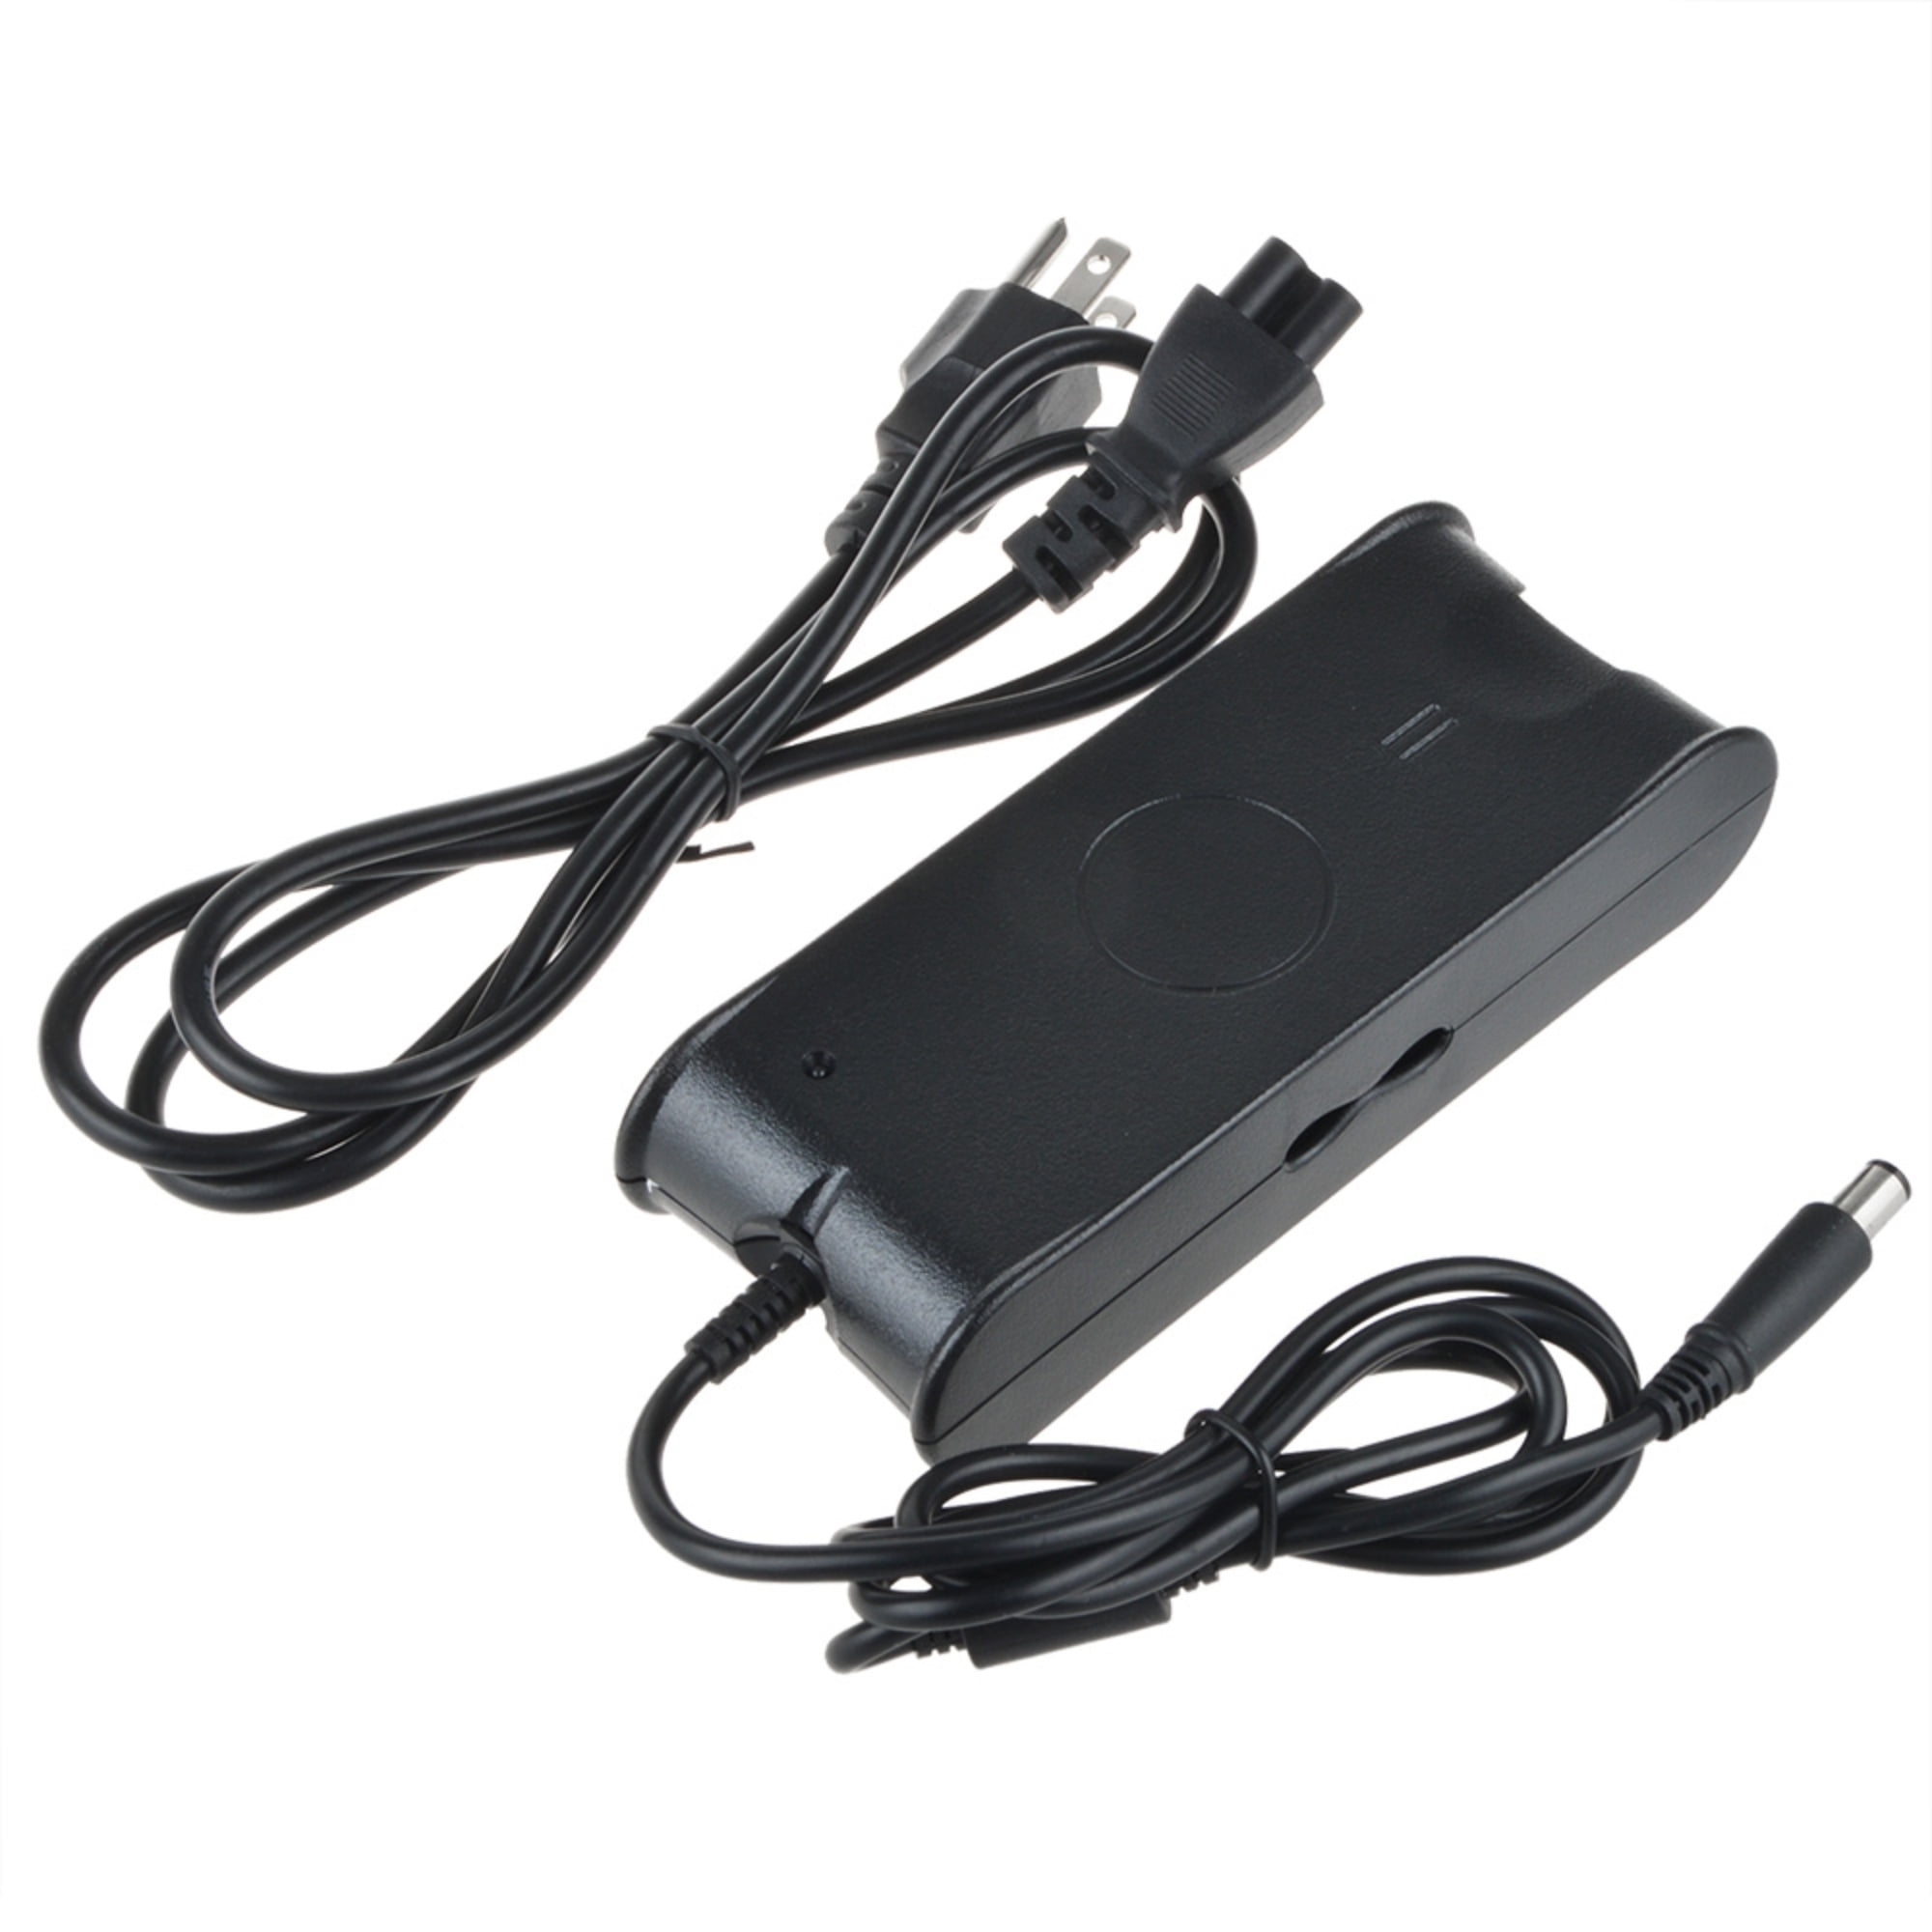 PKPOWER AC Adapter Charger for Dell HA65NS5-00 HA65NS5-XX A065R007L PA-10